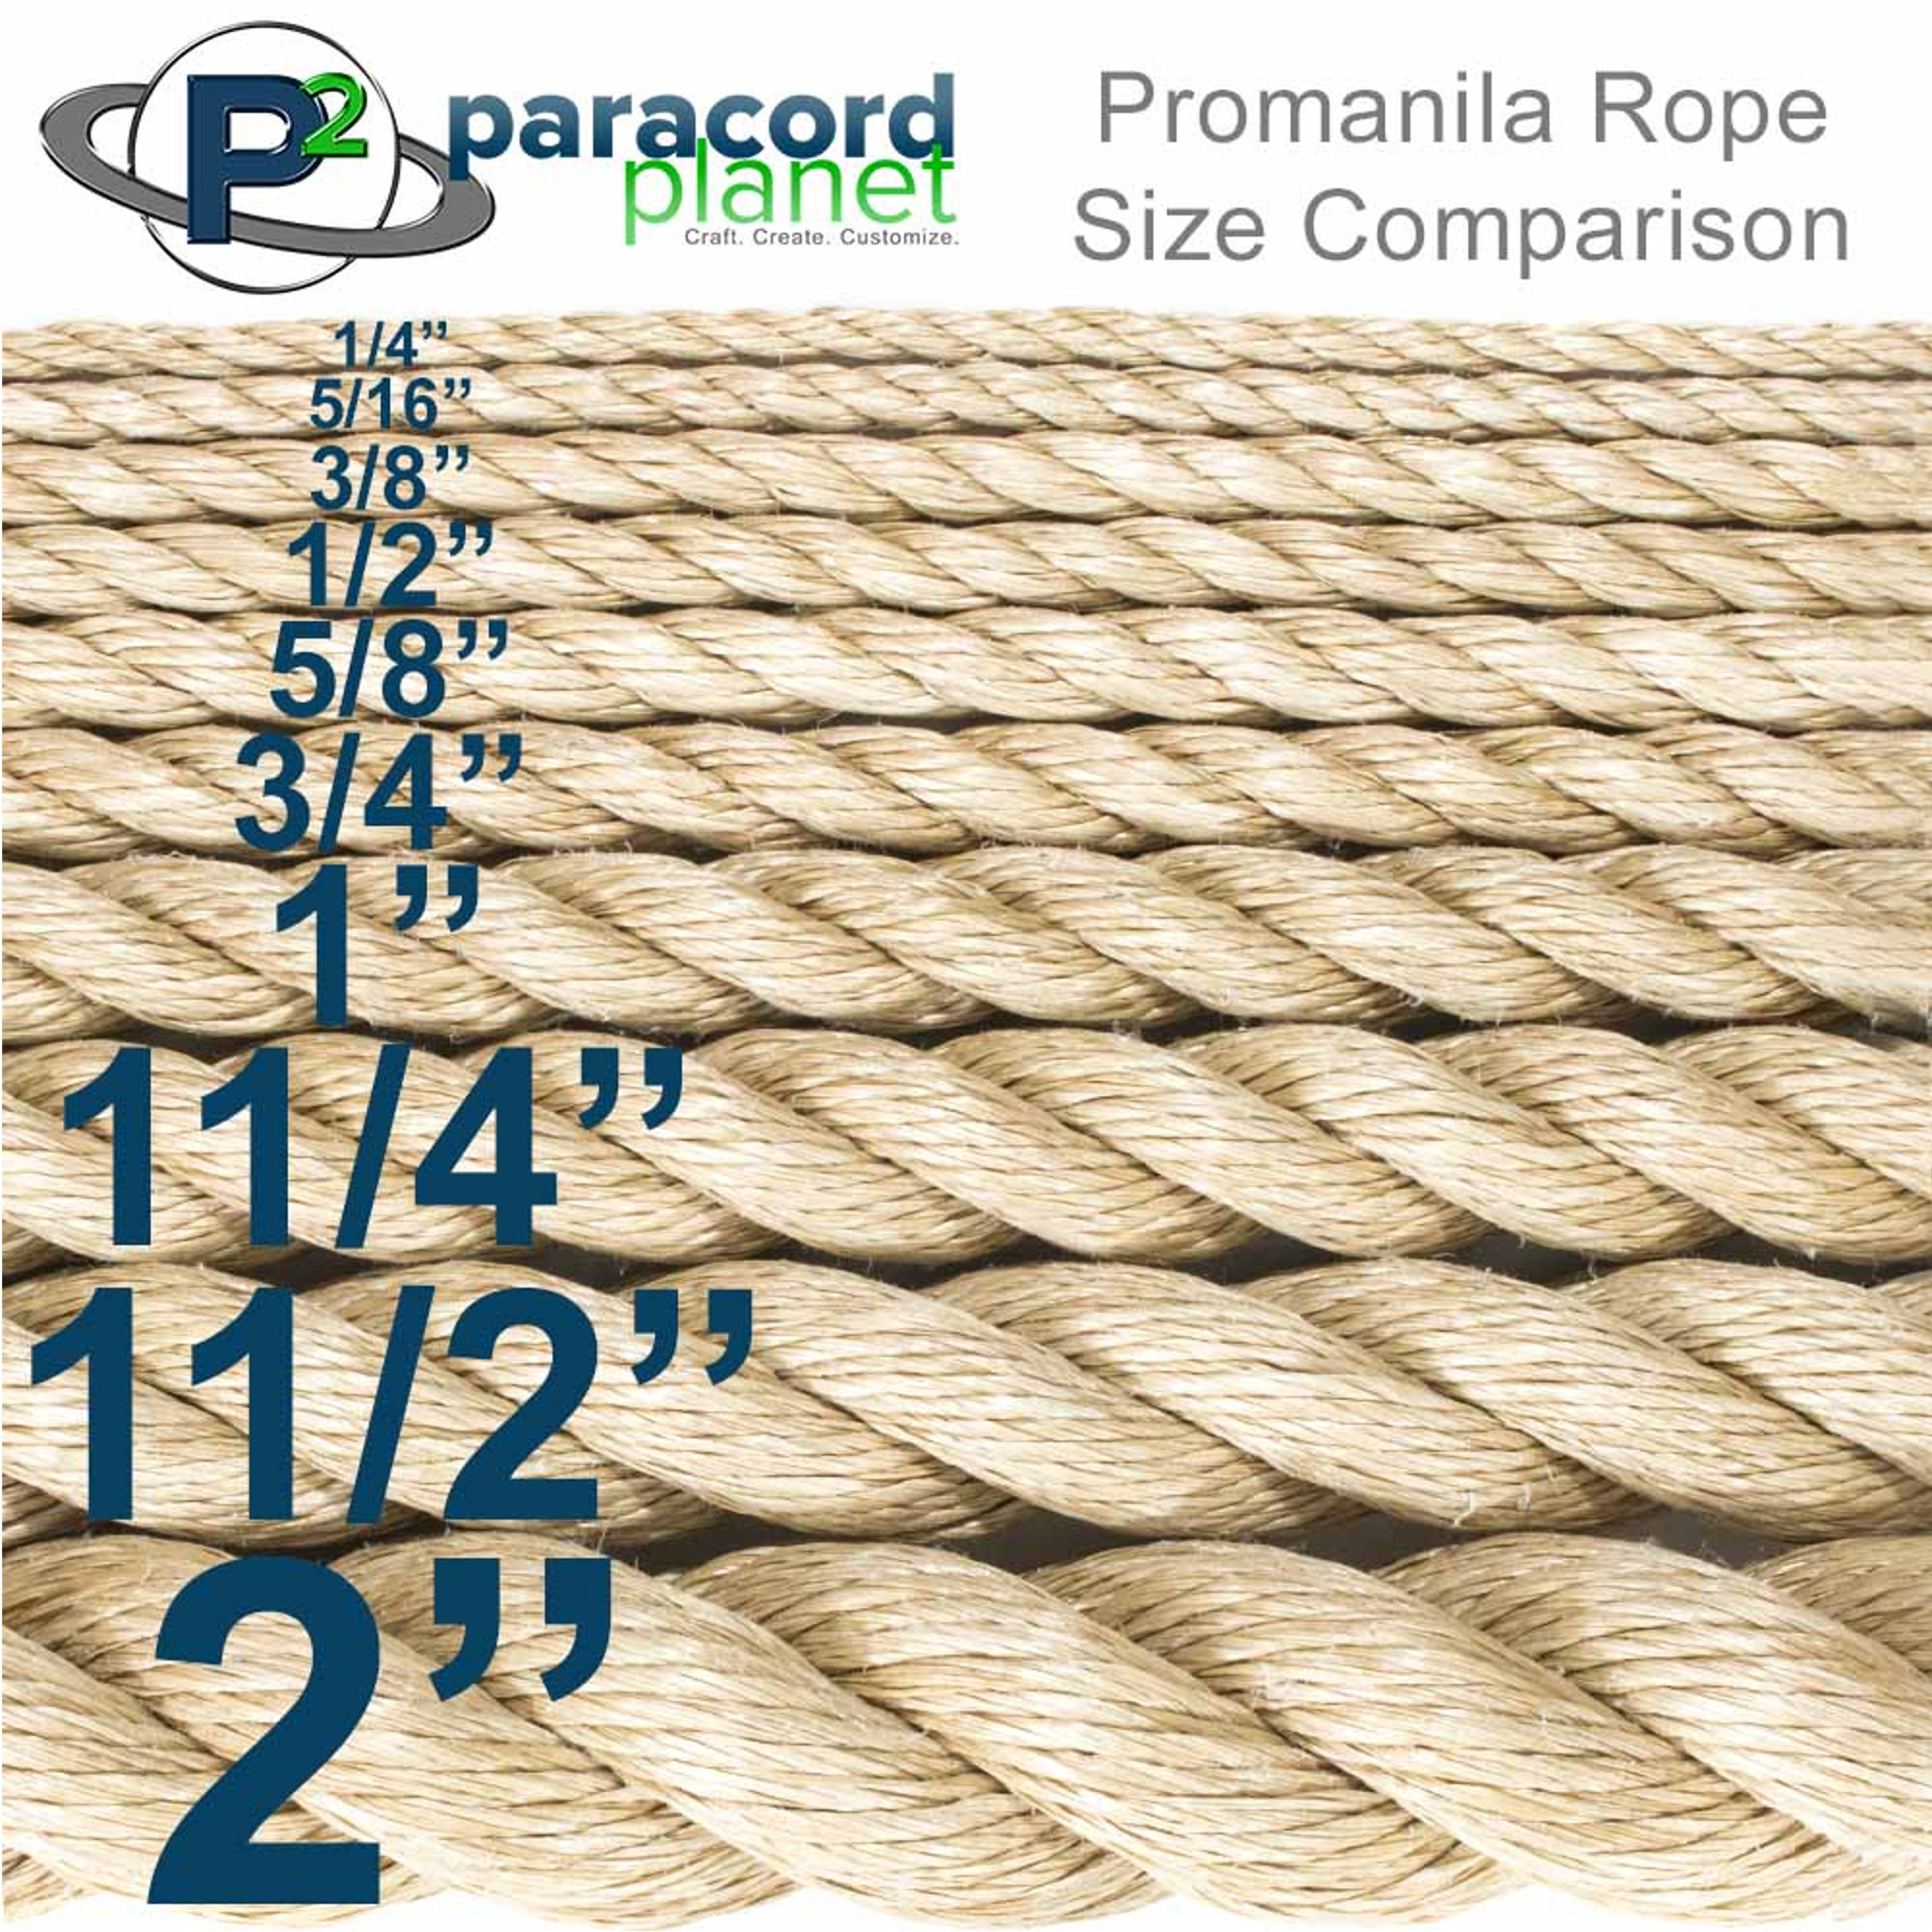 3 Strand Twisted ProManila Polypro Rope - Sizes range from 1/4 Inch - 2 Inch Diameters - 10-600Ft Lengths - image 2 of 2